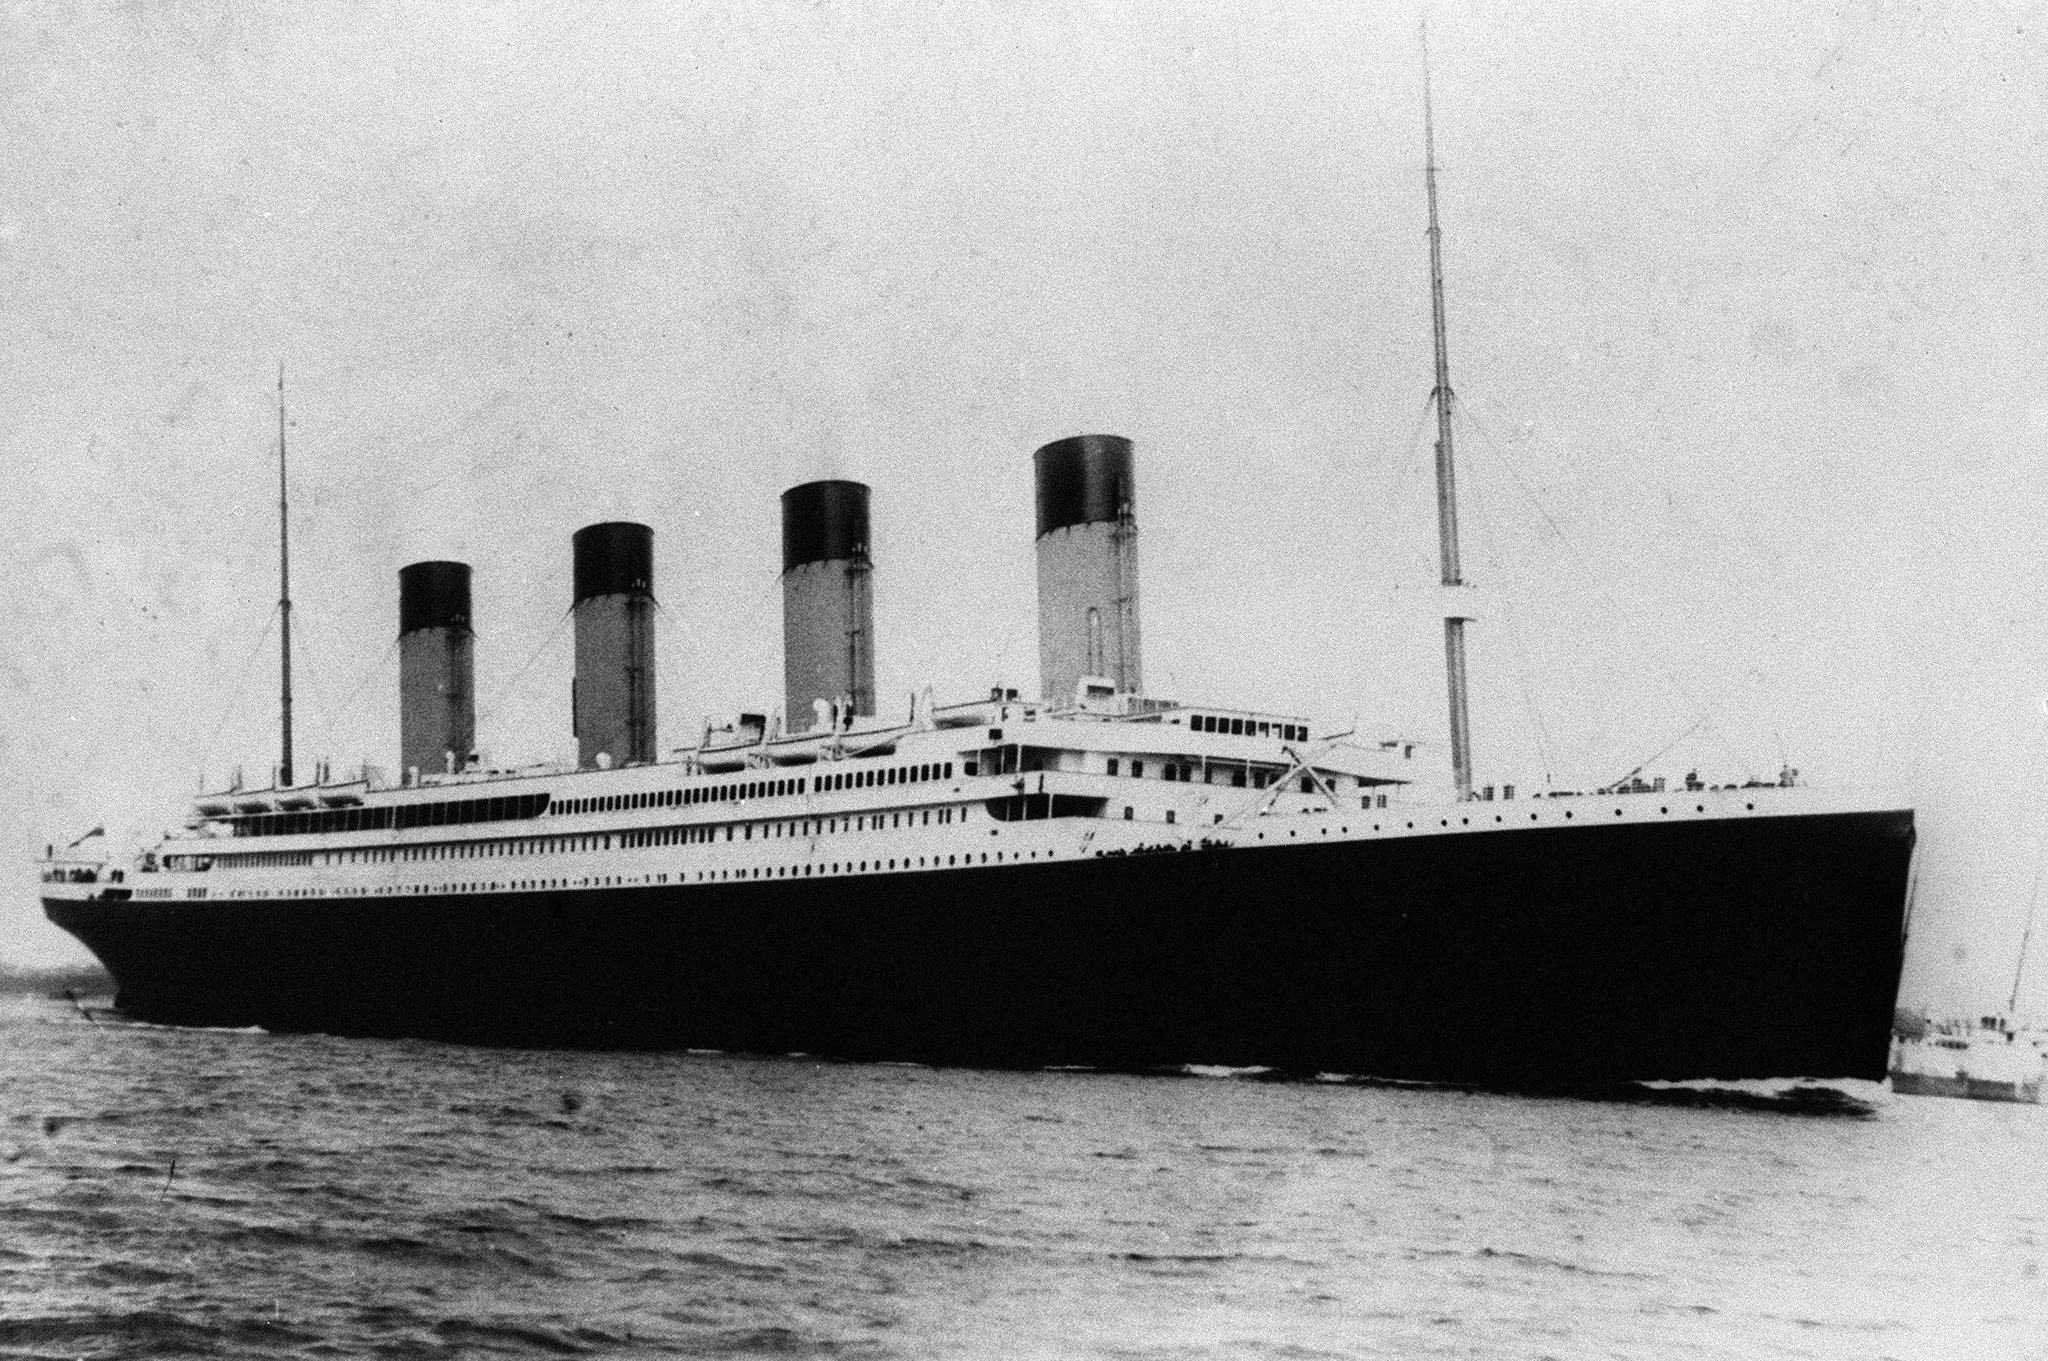 Detailed accounts of last days of the Titanic